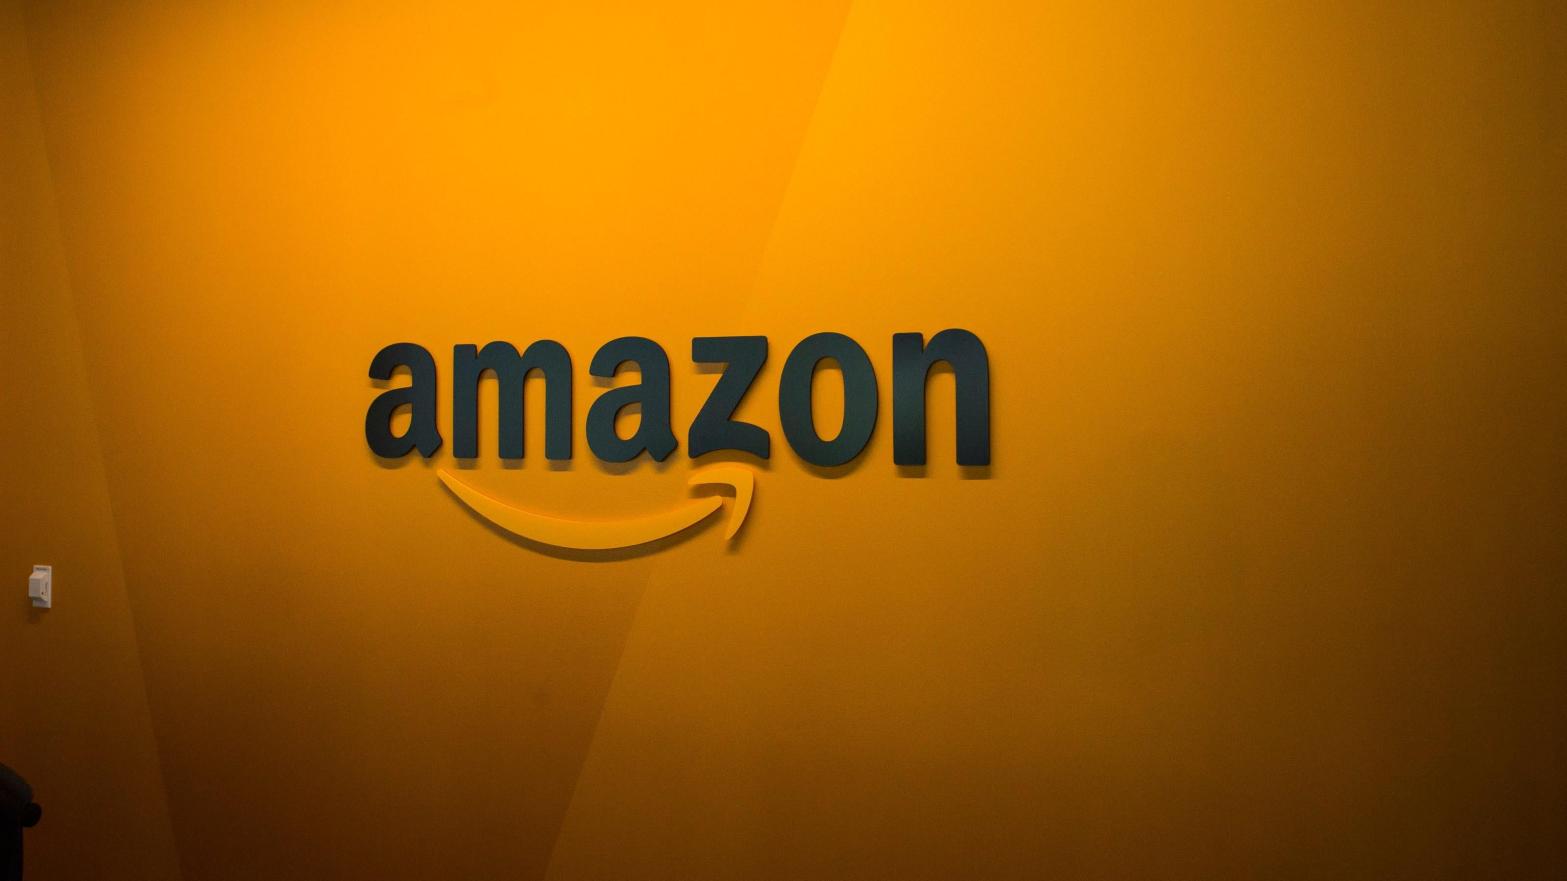 In Amazon's view, customers don't need disclaimers. They just need to read the reviews. (Photo: David Ryder, Getty Images)